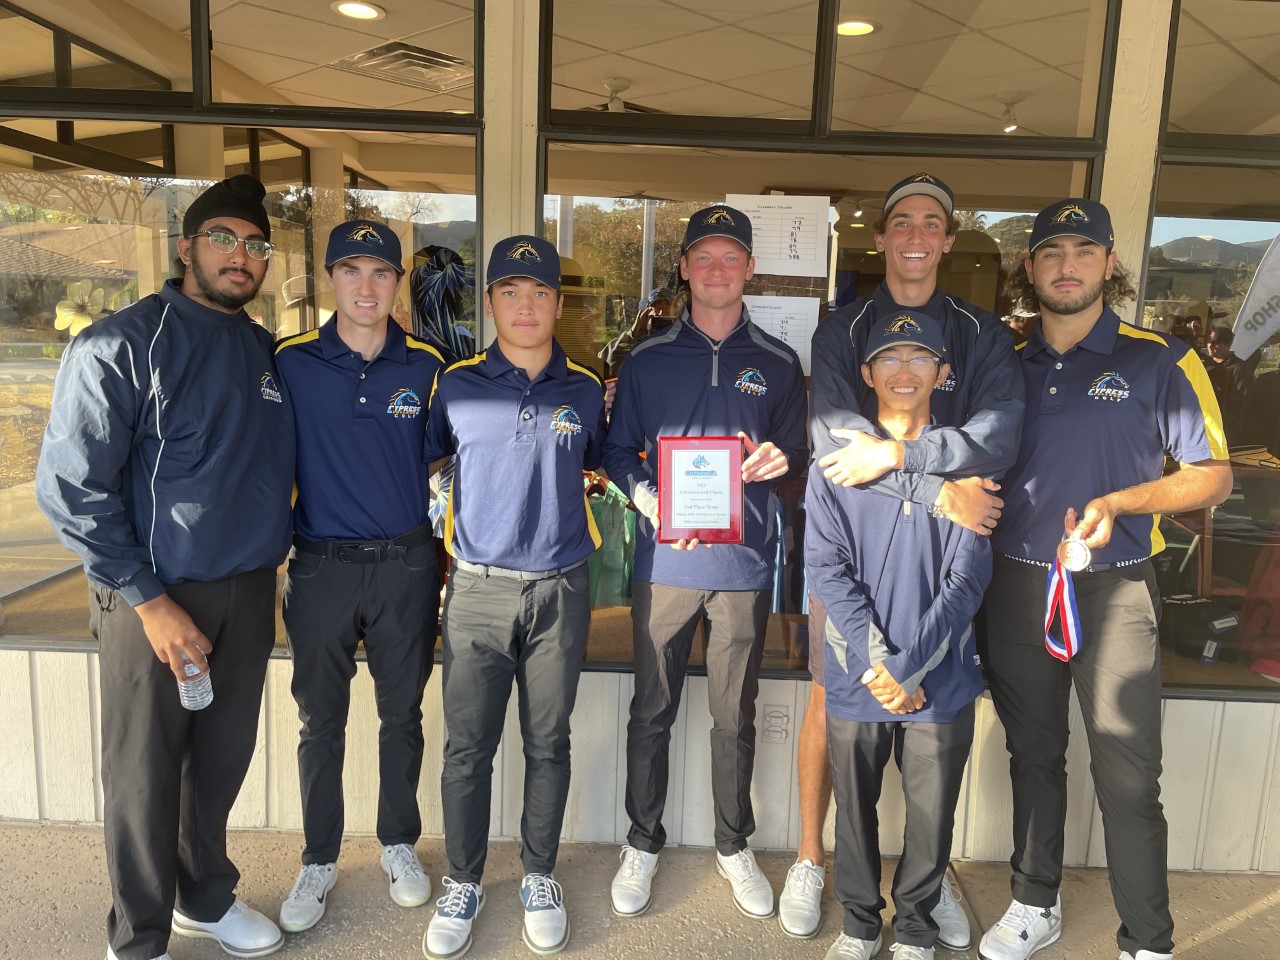 Cypress Grabs Second Place at Cuyamaca Classic